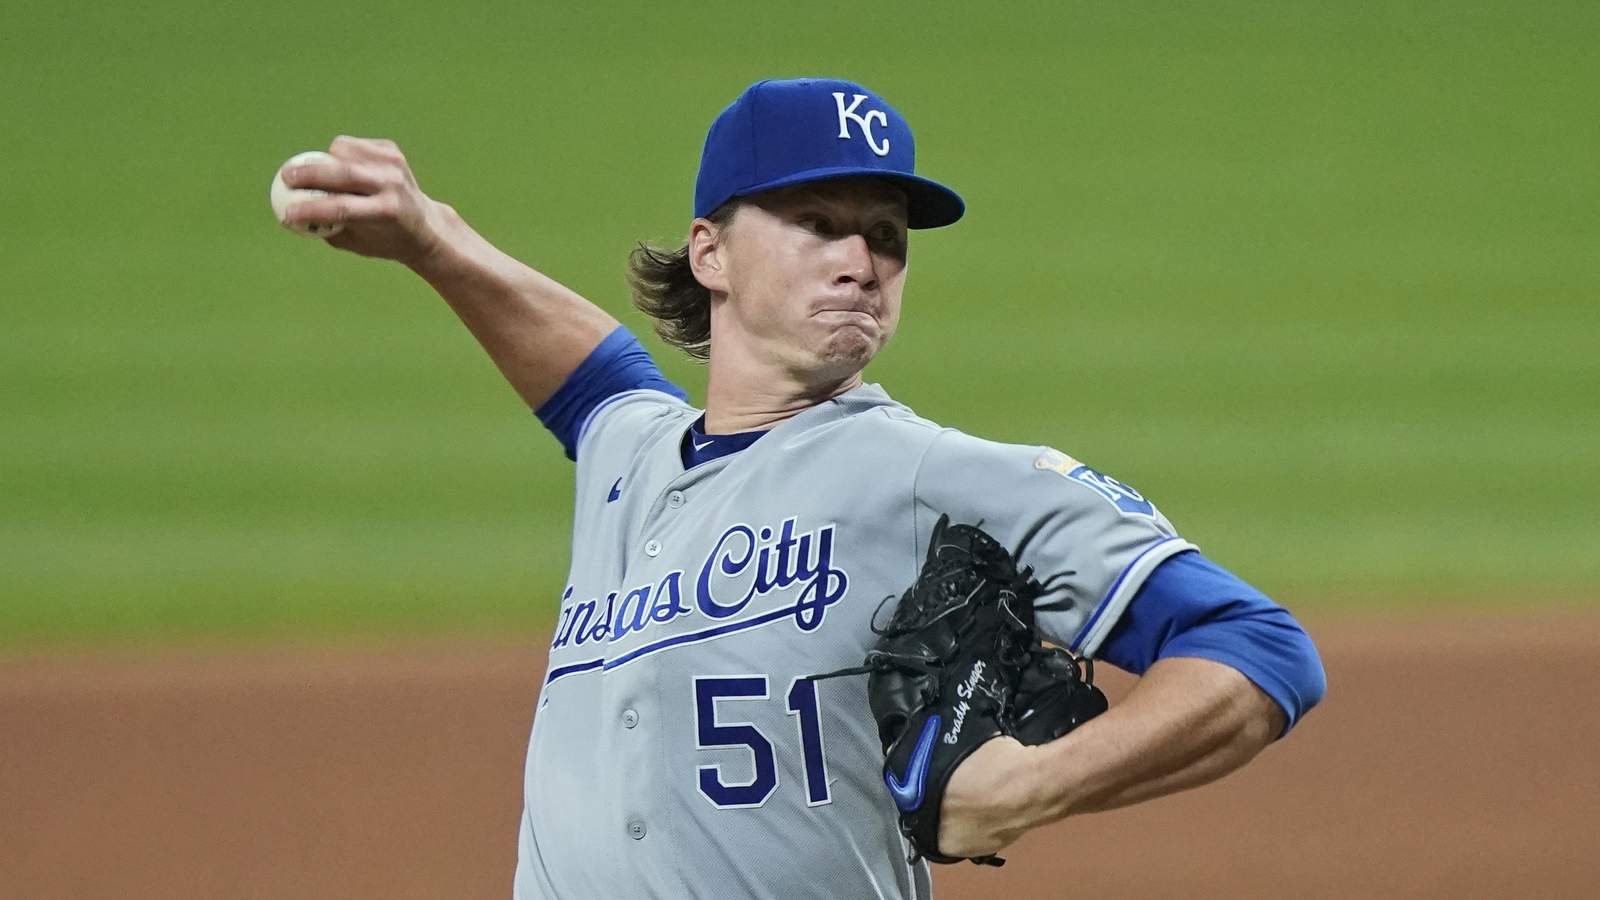 Singer flirts with no-hitter for 8, Royals beat Indians 11-1